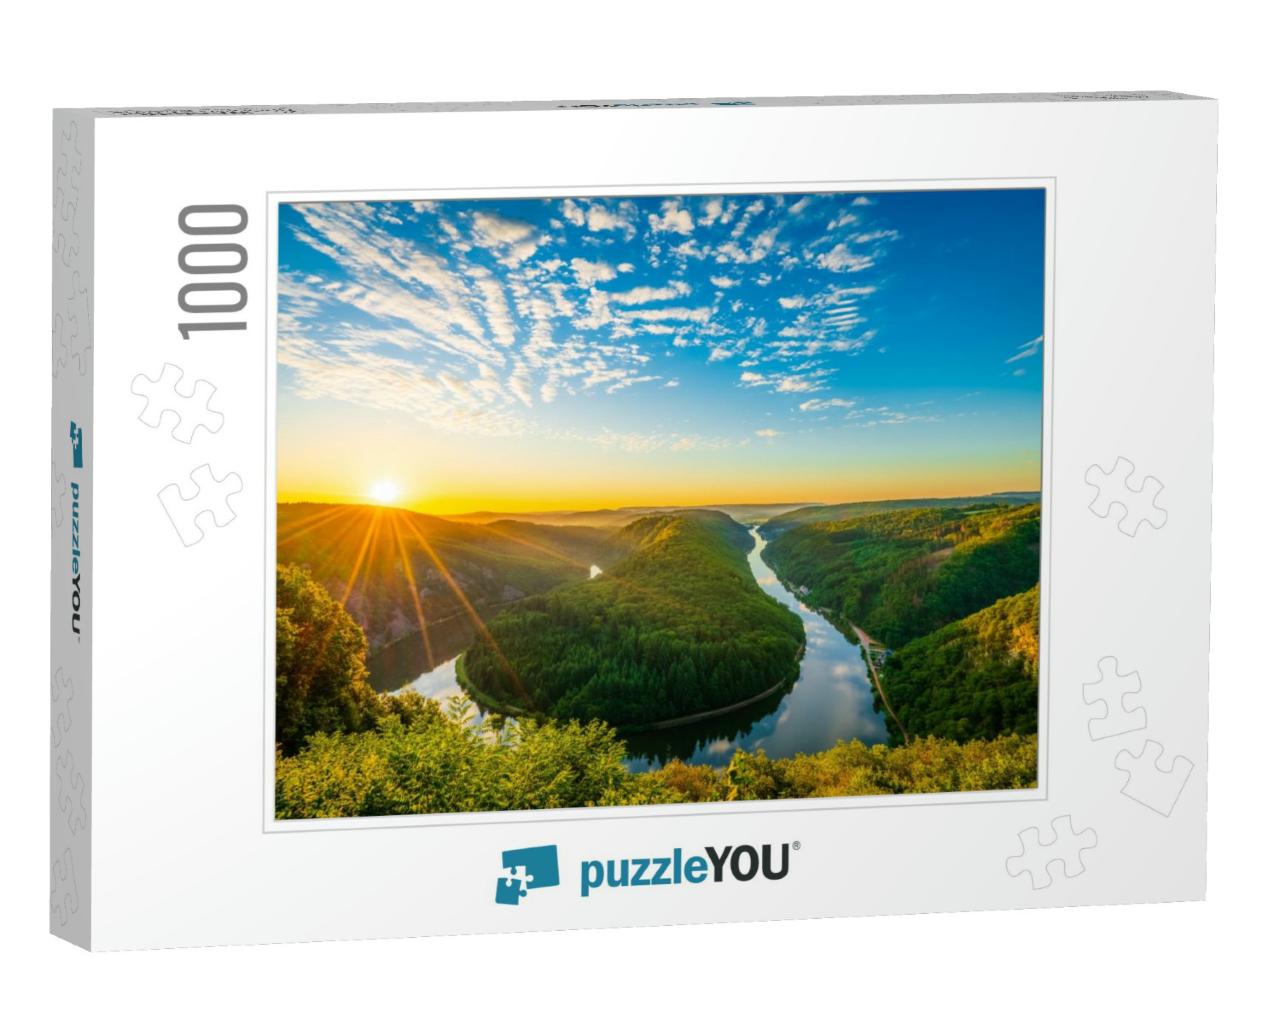 Saar River Valley Near Mettlach At Sunrise. South Germany... Jigsaw Puzzle with 1000 pieces